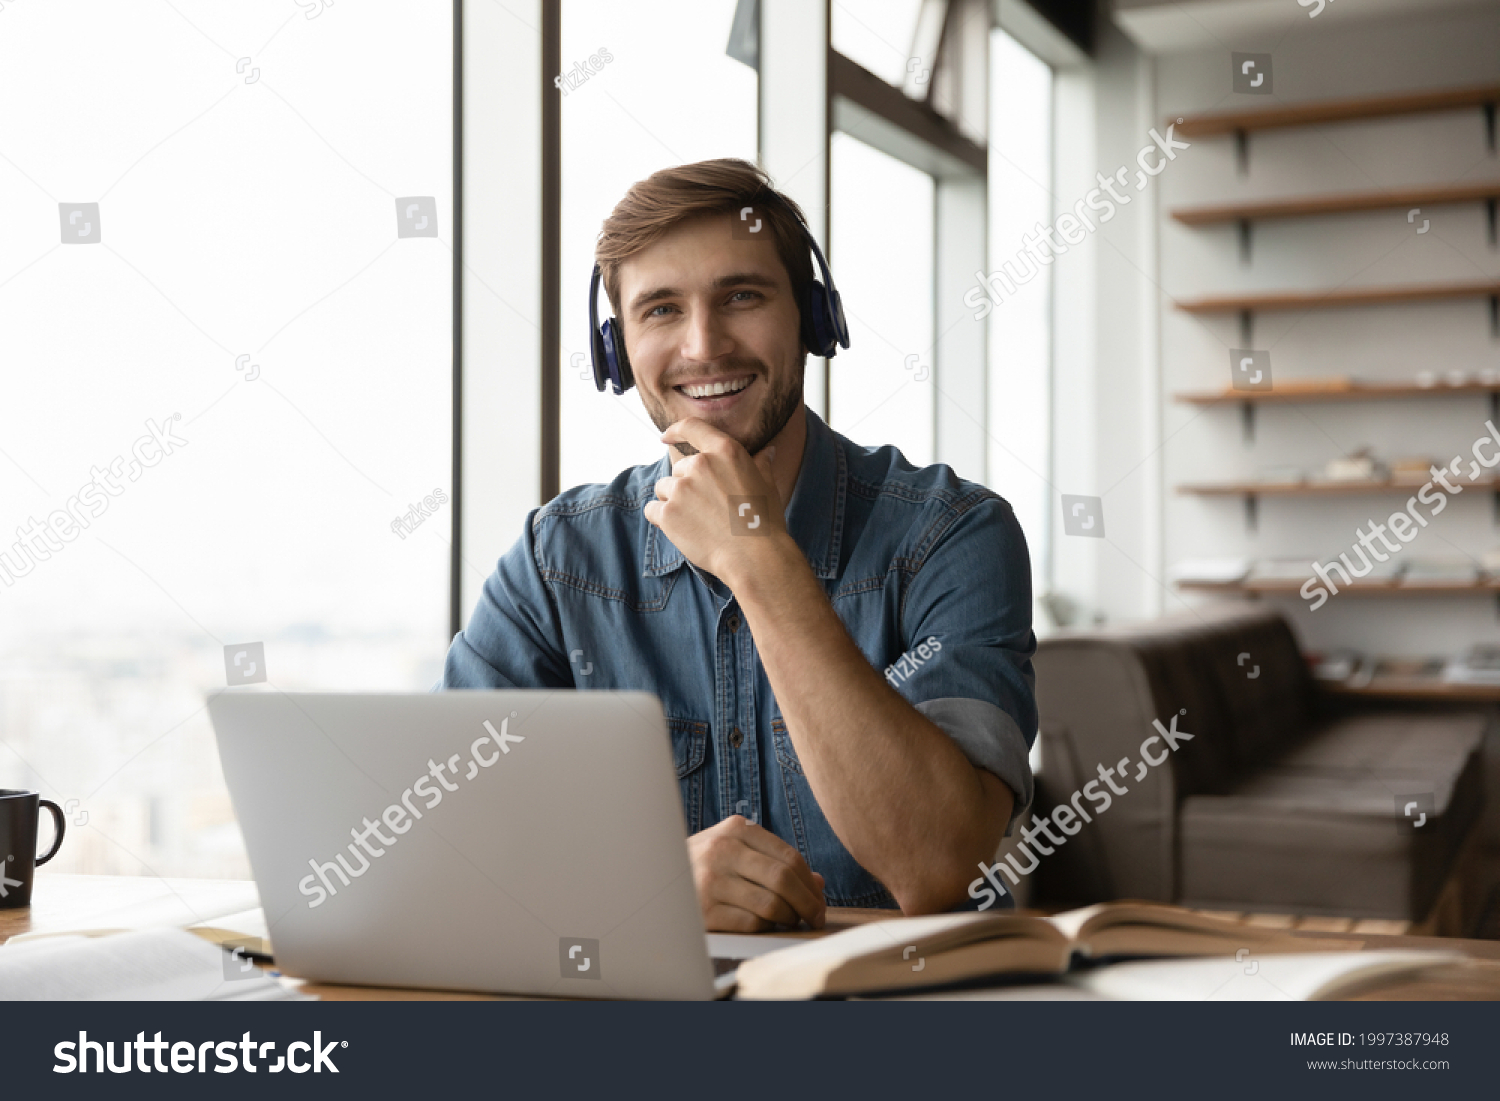 Portrait of happy millennial generation man in headphones sitting at table with books and computer. Smiling young male student posing in modern home office, e-learning distantly on online courses. #1997387948